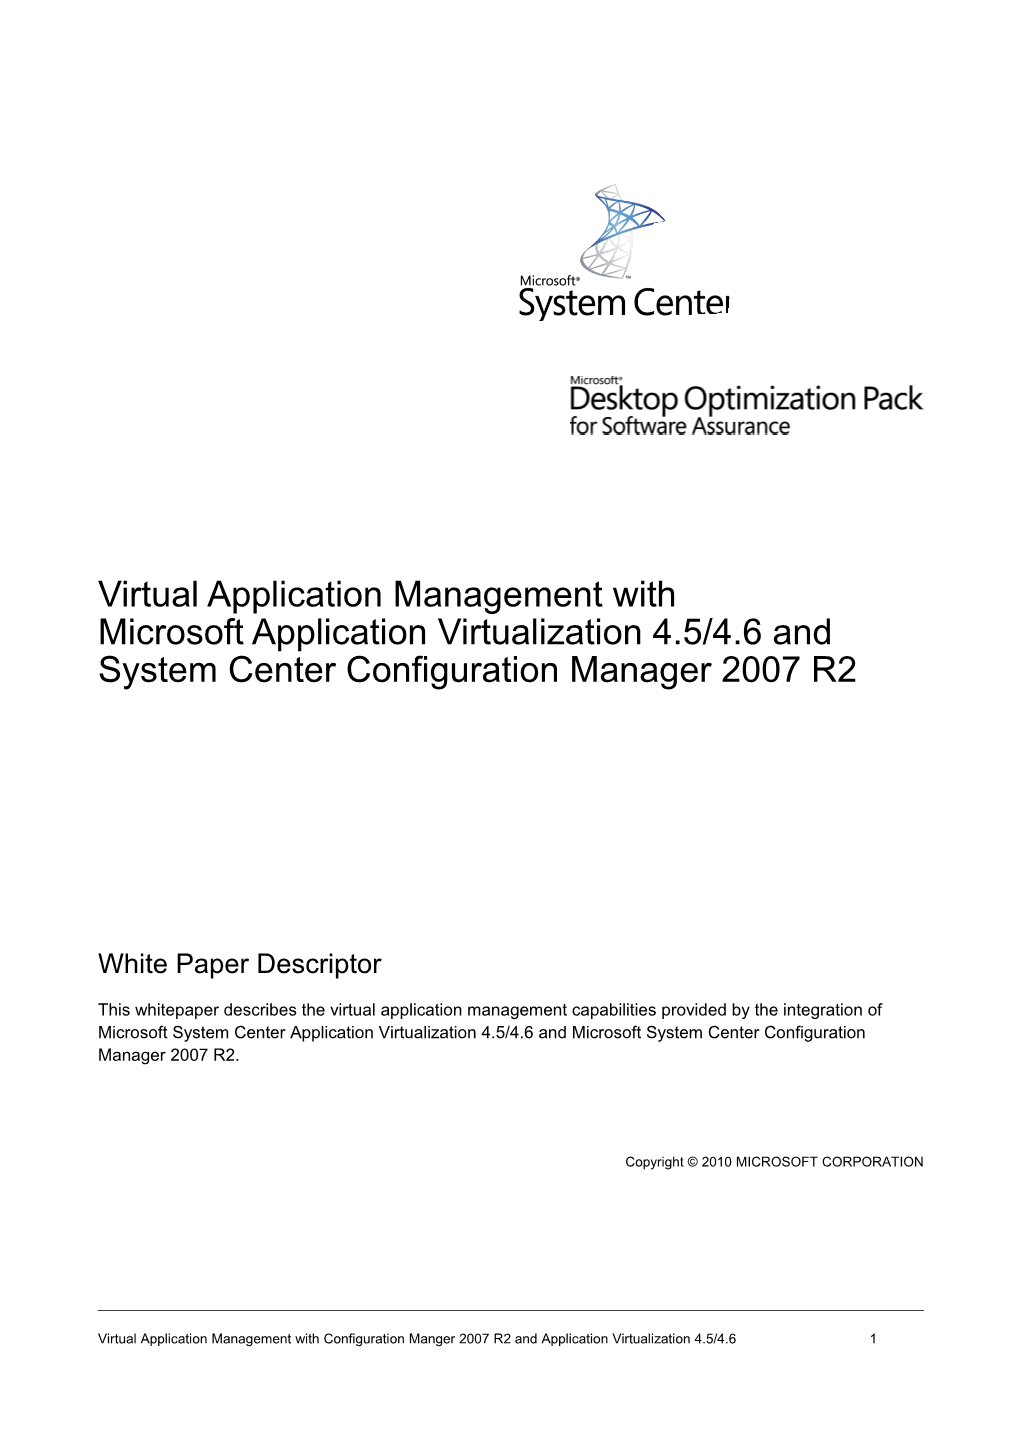 Virtual Application Management with Microsoft Application Virtualization 4.5/4.6 and System